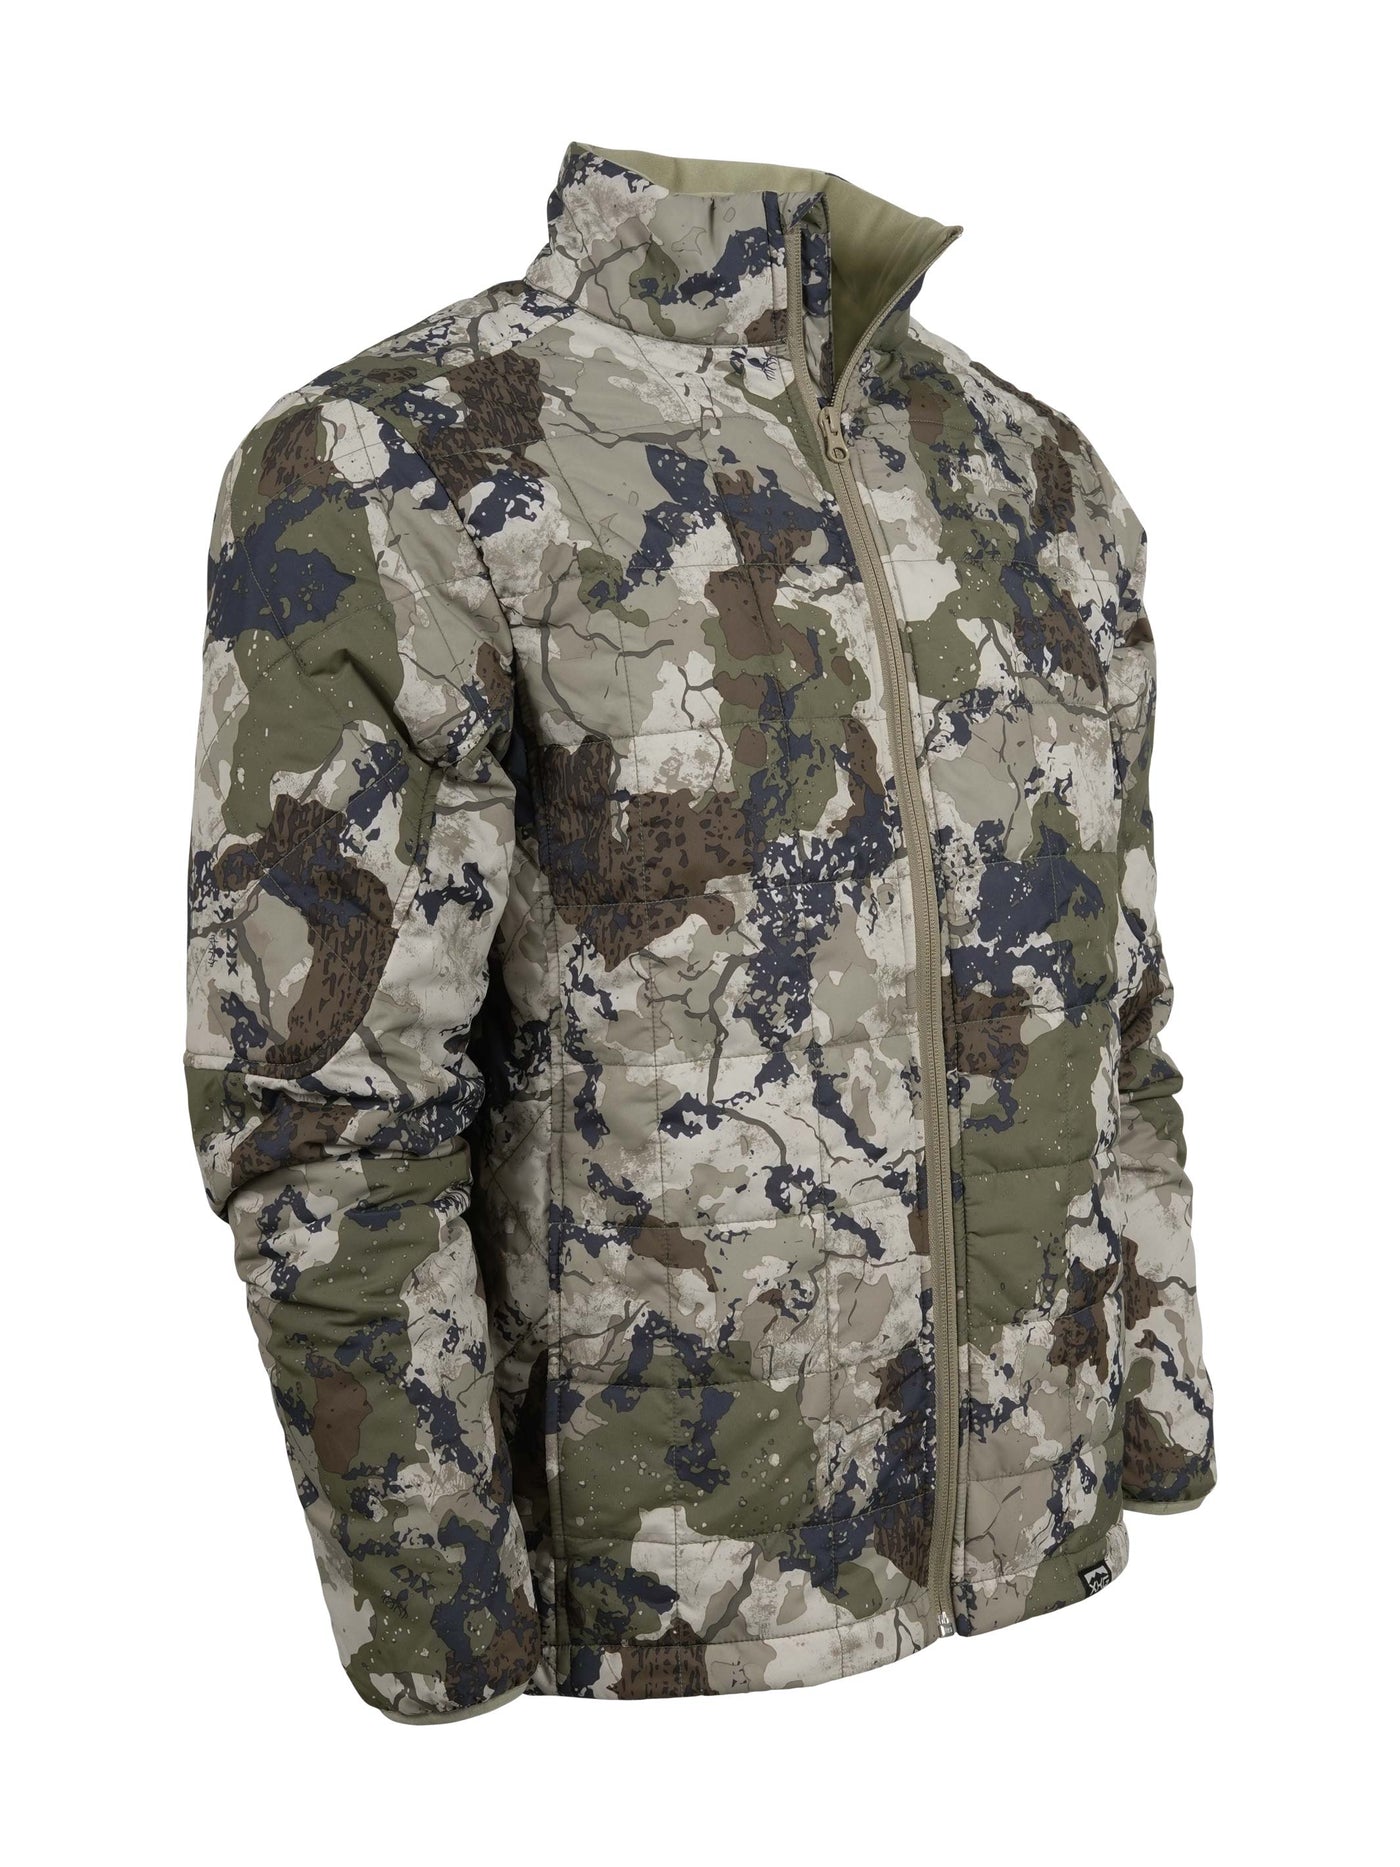 XKG Transition Thermolite Jacket in XK7 | King's Camo